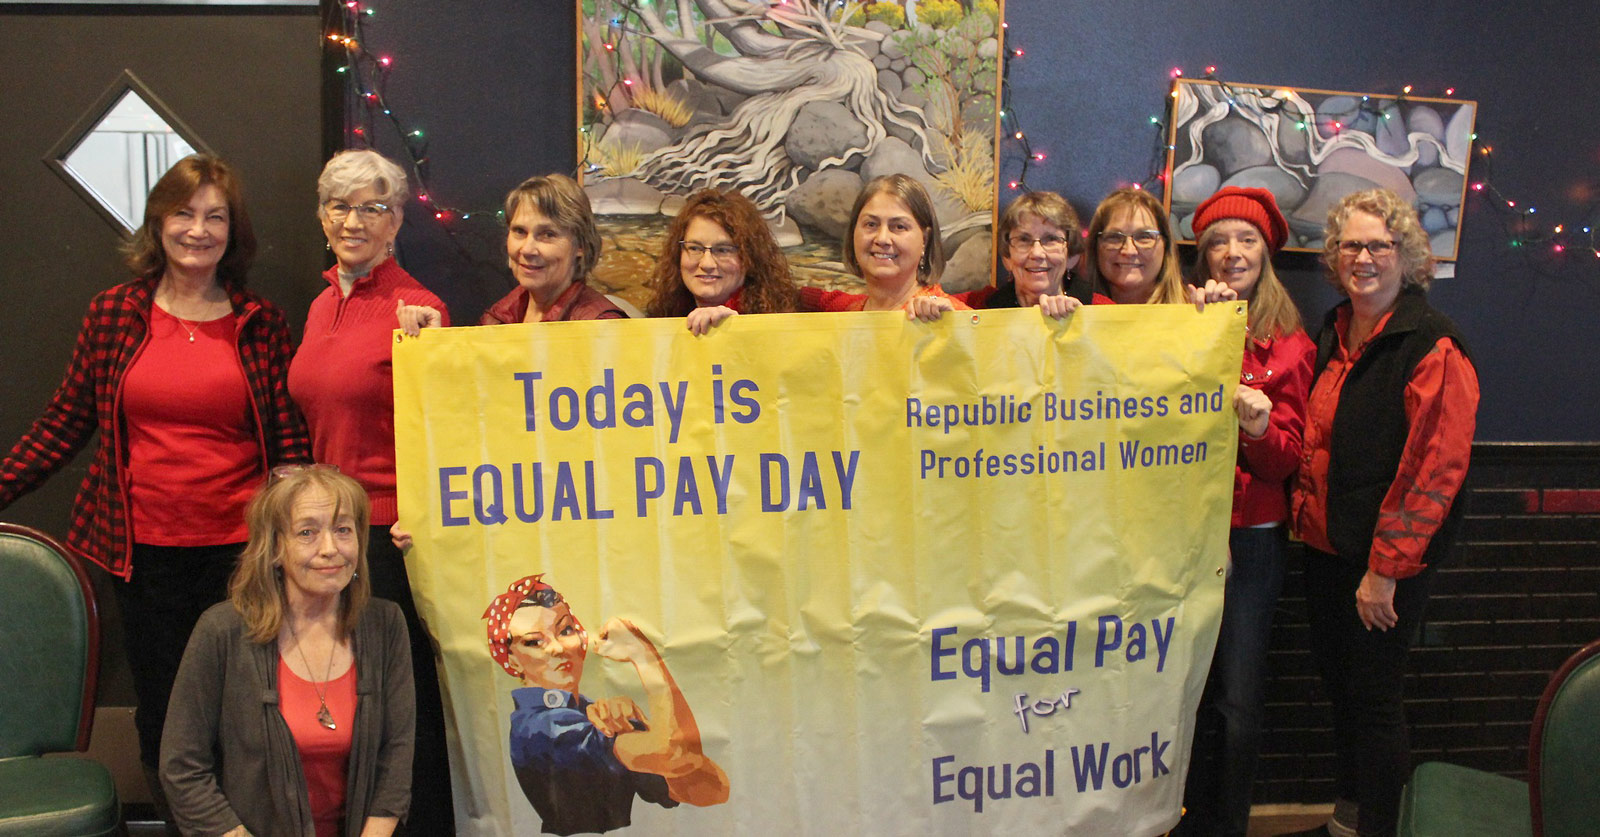 Women posing with a Today is Equal Pay Day sign